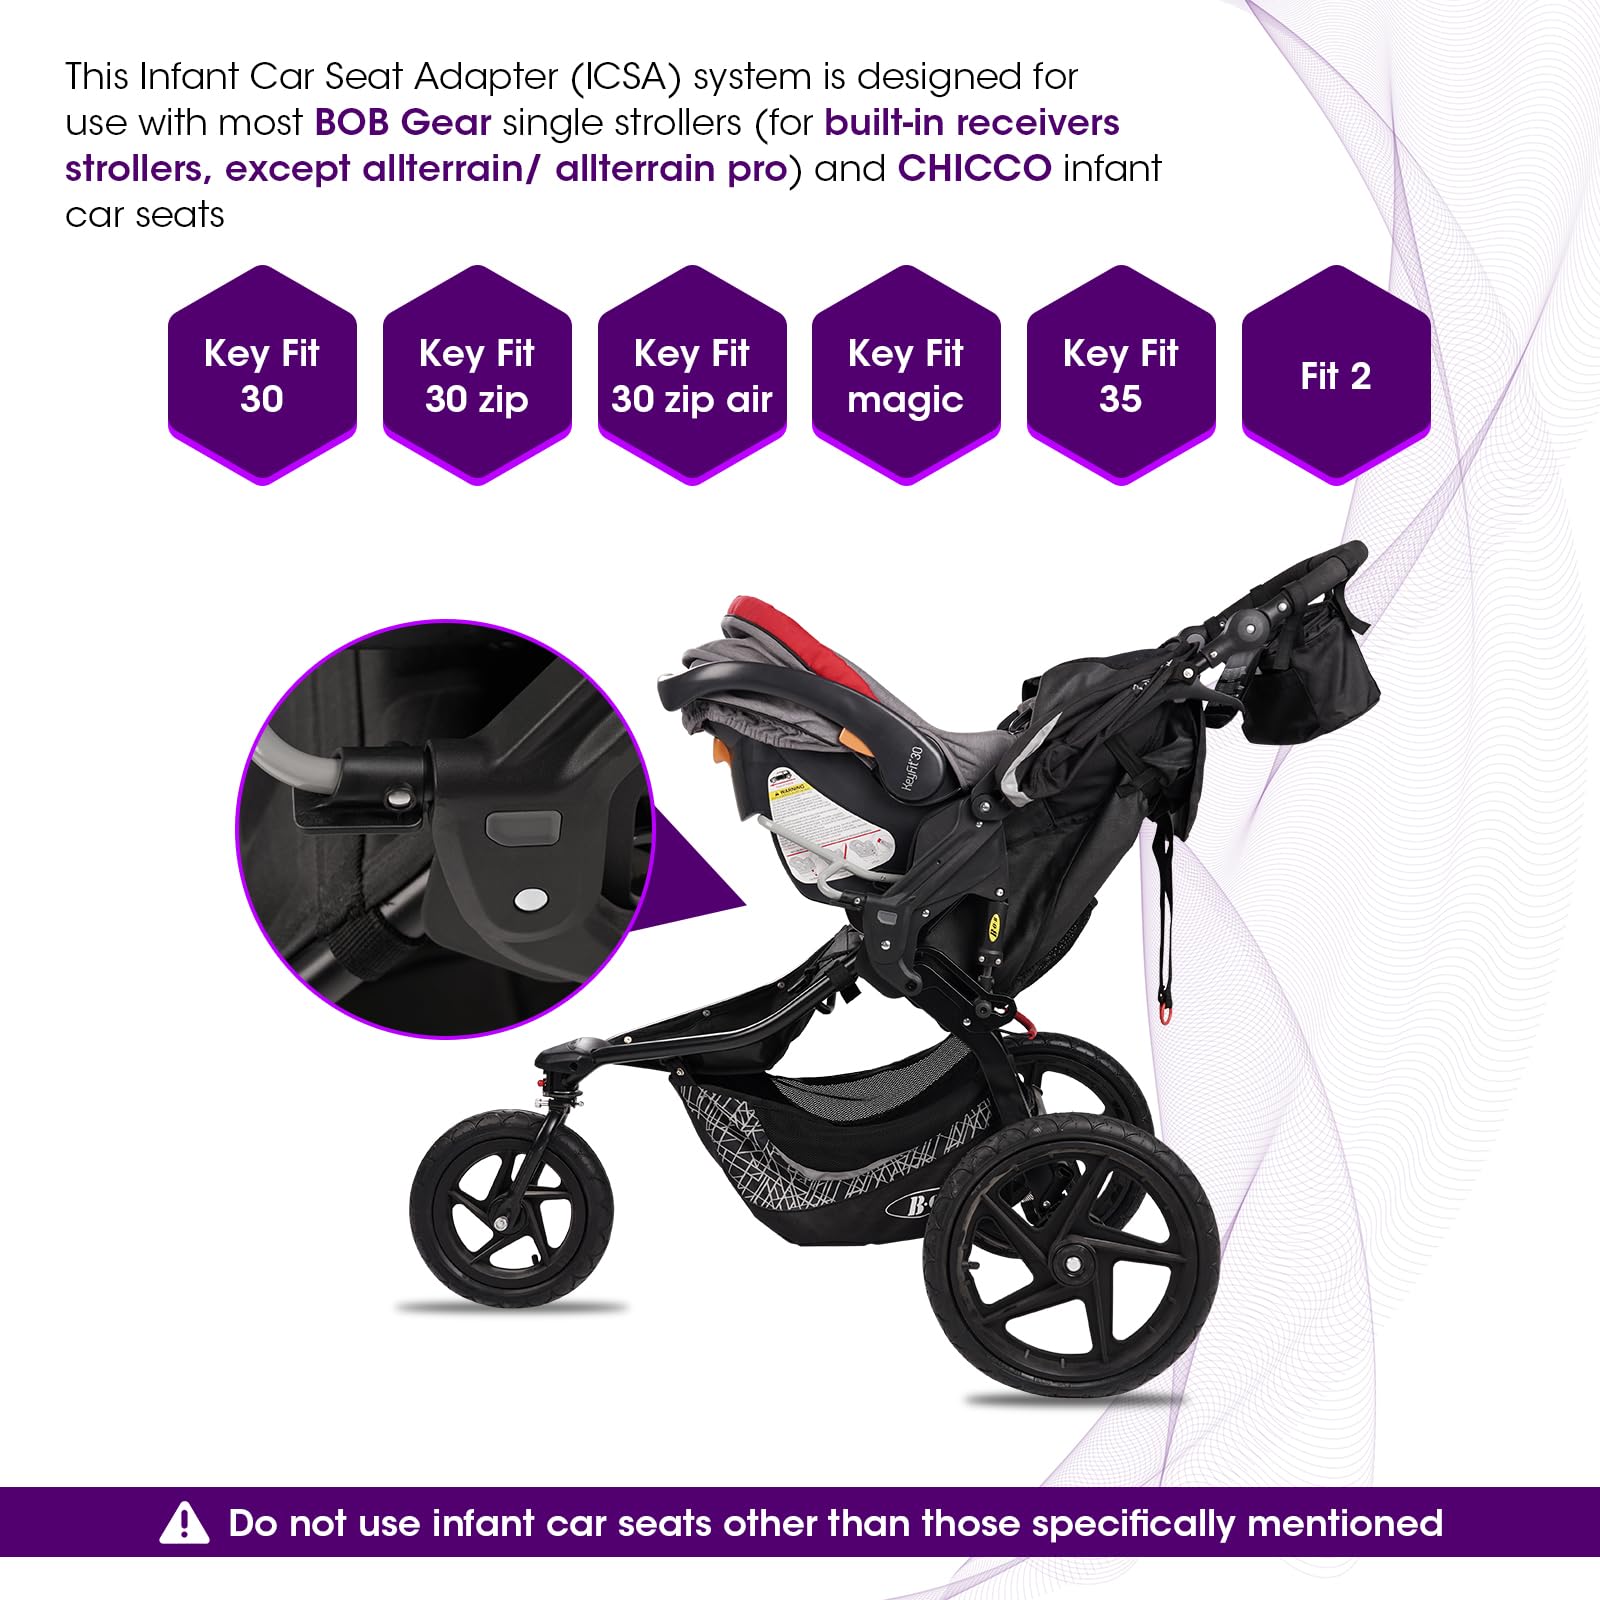 Touri Infant Car Seat Adapter Connect BOB Gear Single Jogging Stroller with Chicco Infant Car Seats, Stroller Accessories, Removable Receivers NOT Included